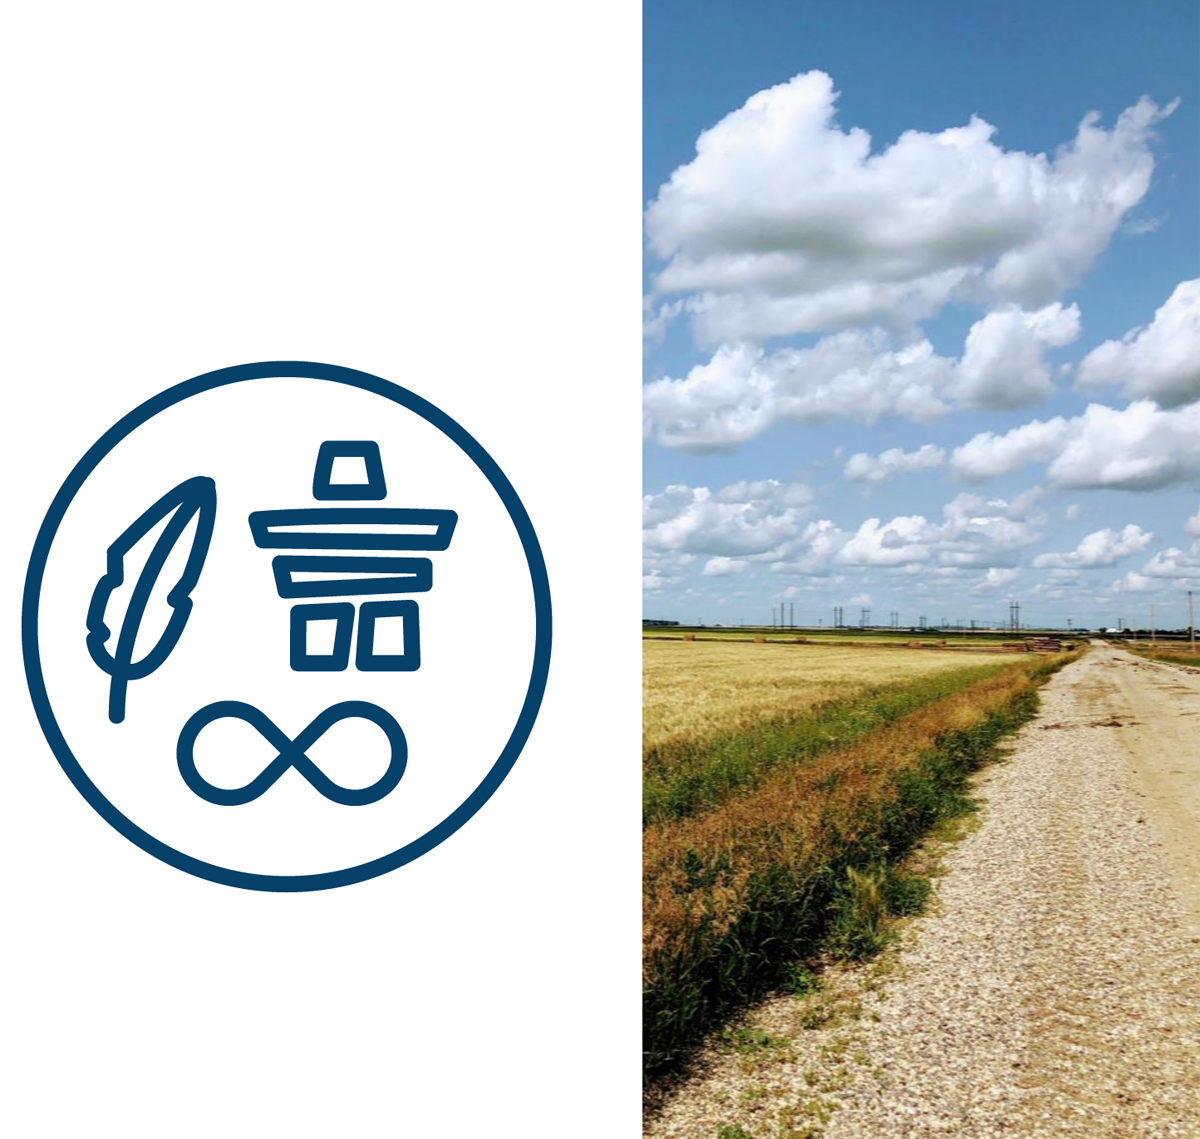 Left – Feather, métis infinity symbol and an inuksuk; Right – Prairie landscape and gravel township road